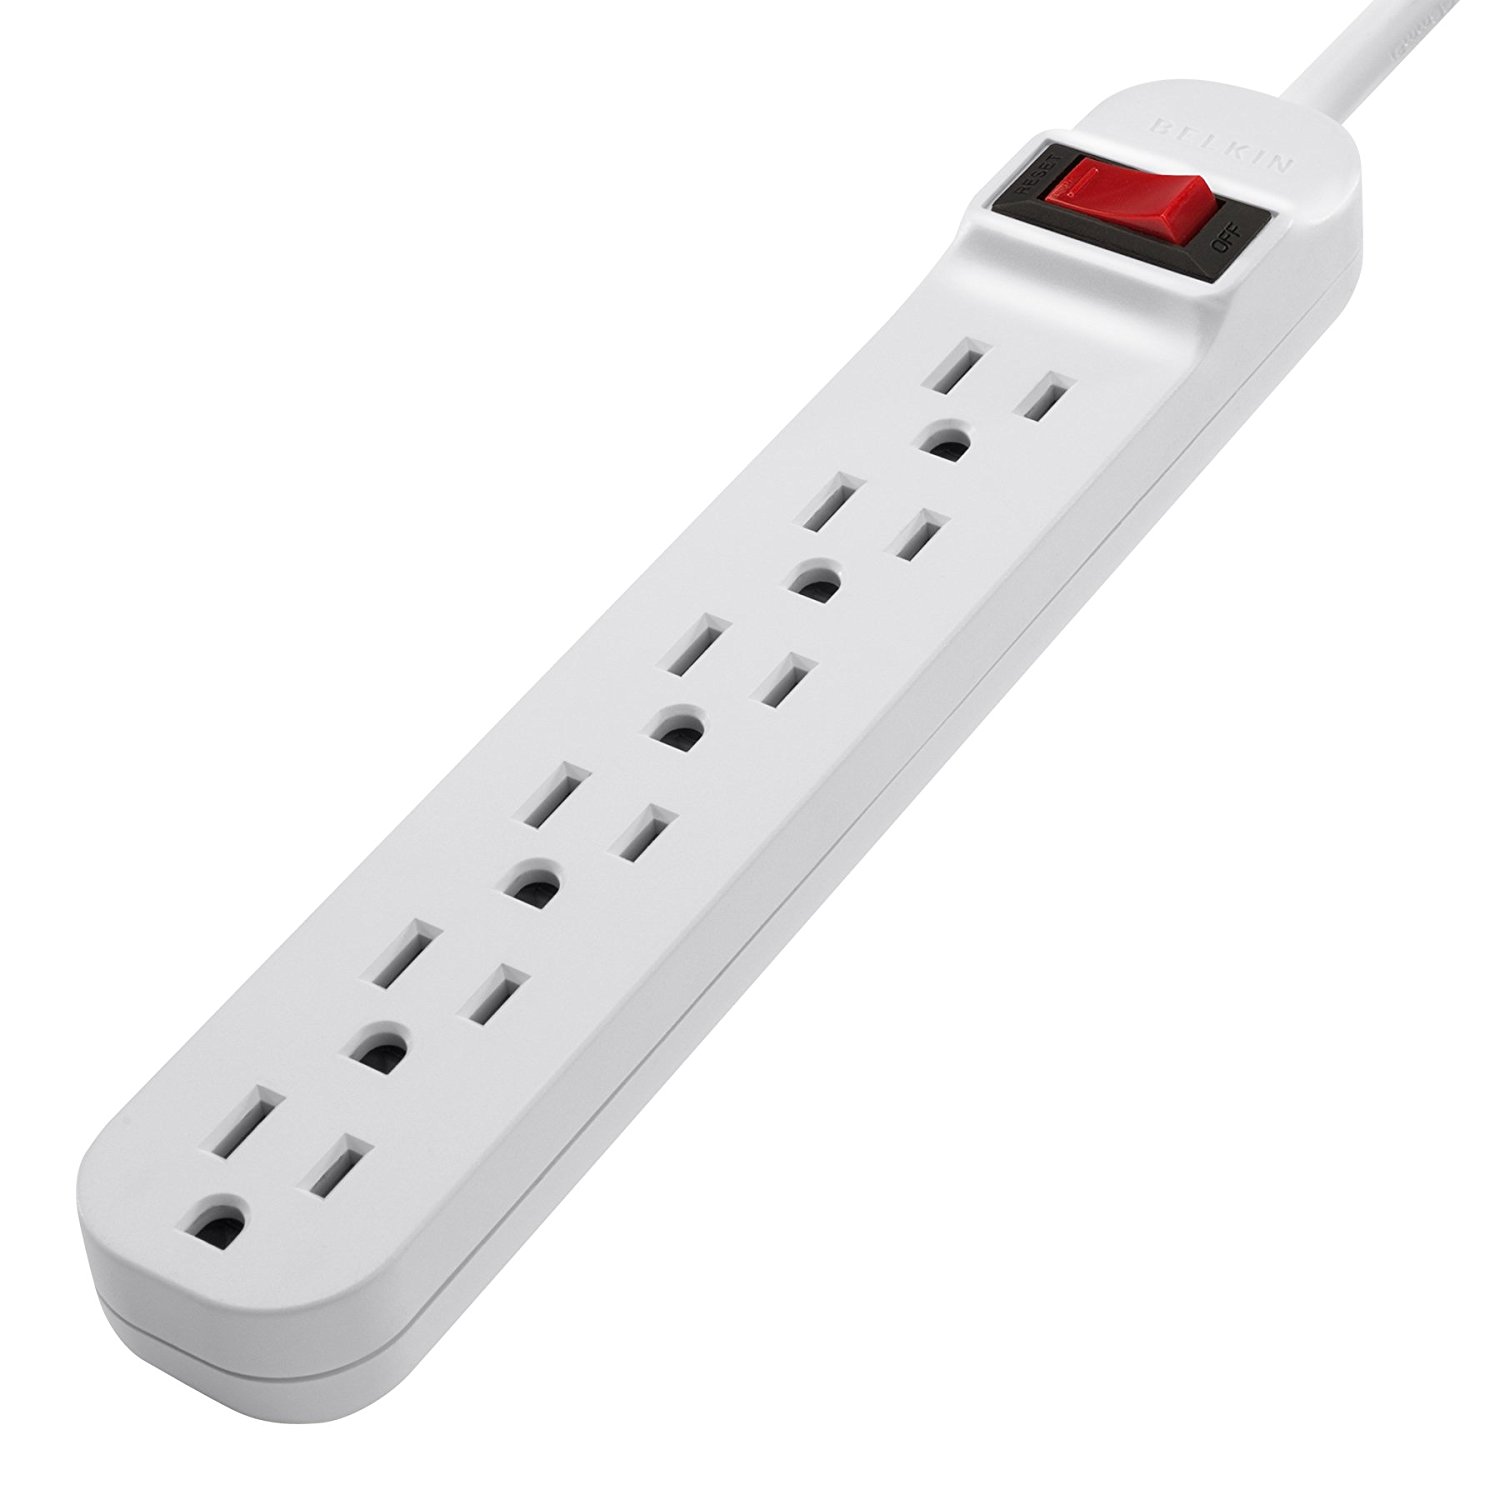 Belkin 6 Outlet Power Strip with 3 Foot Power Cord Only $5.81!